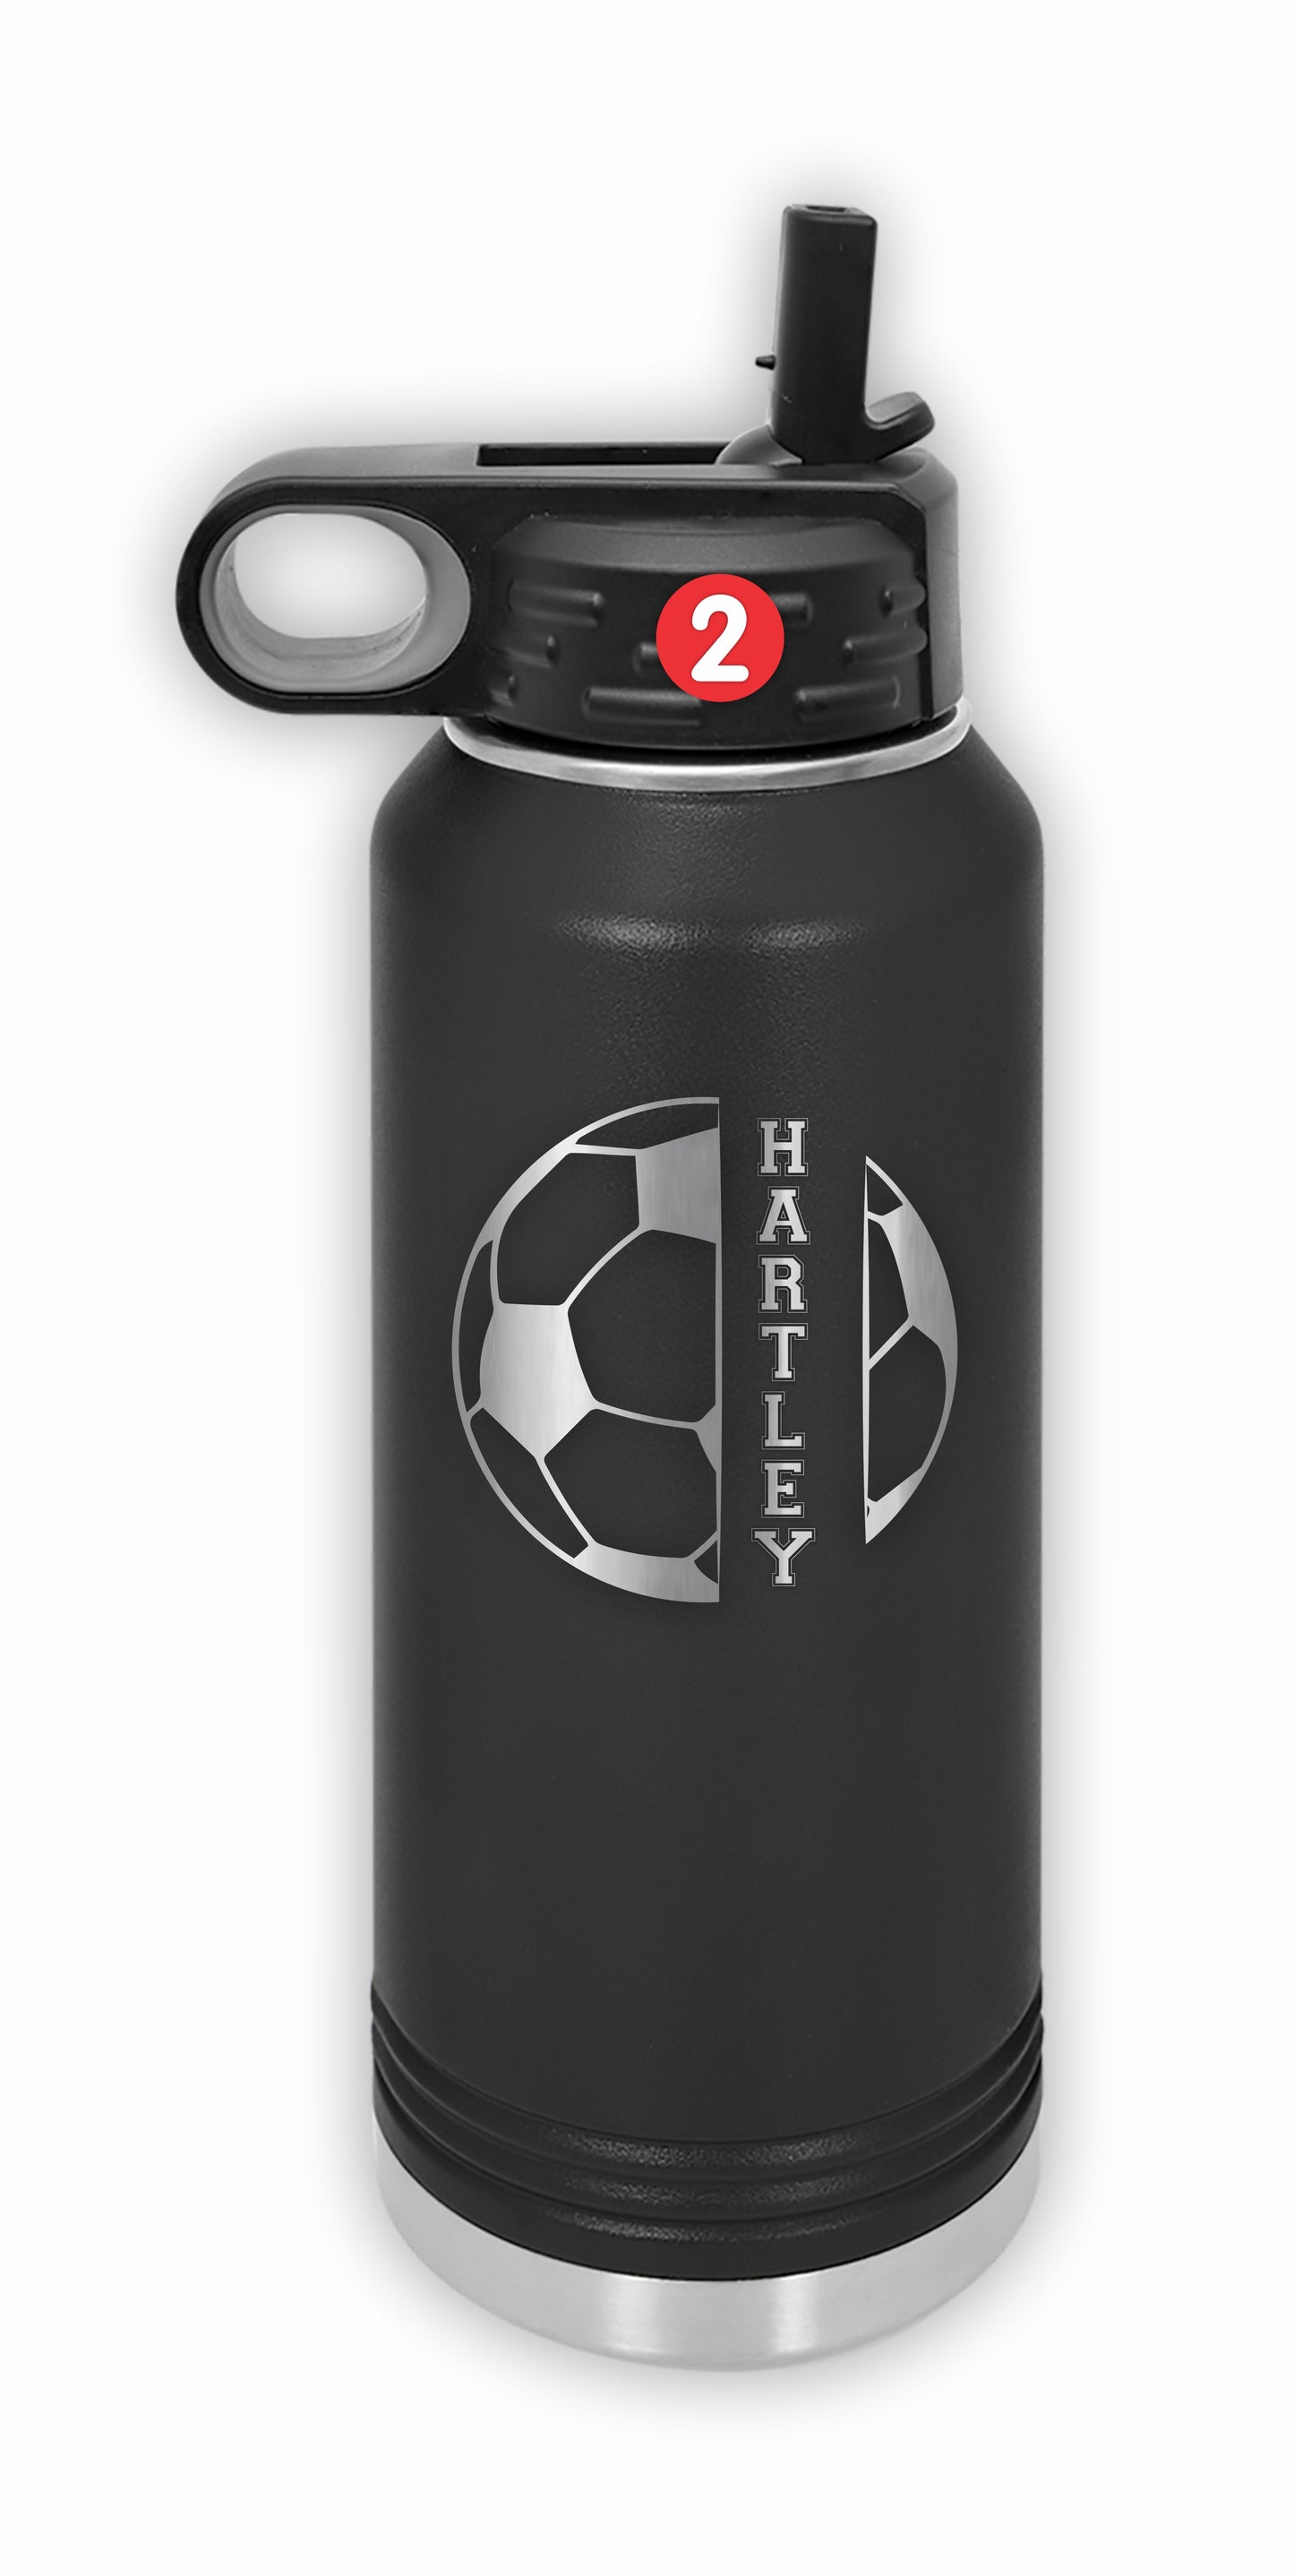 Personalized Soccer Water Bottles, Custom Water Bottles for Soccer Teams, Soccer Coach Bottles, Soccer Player Gift, 